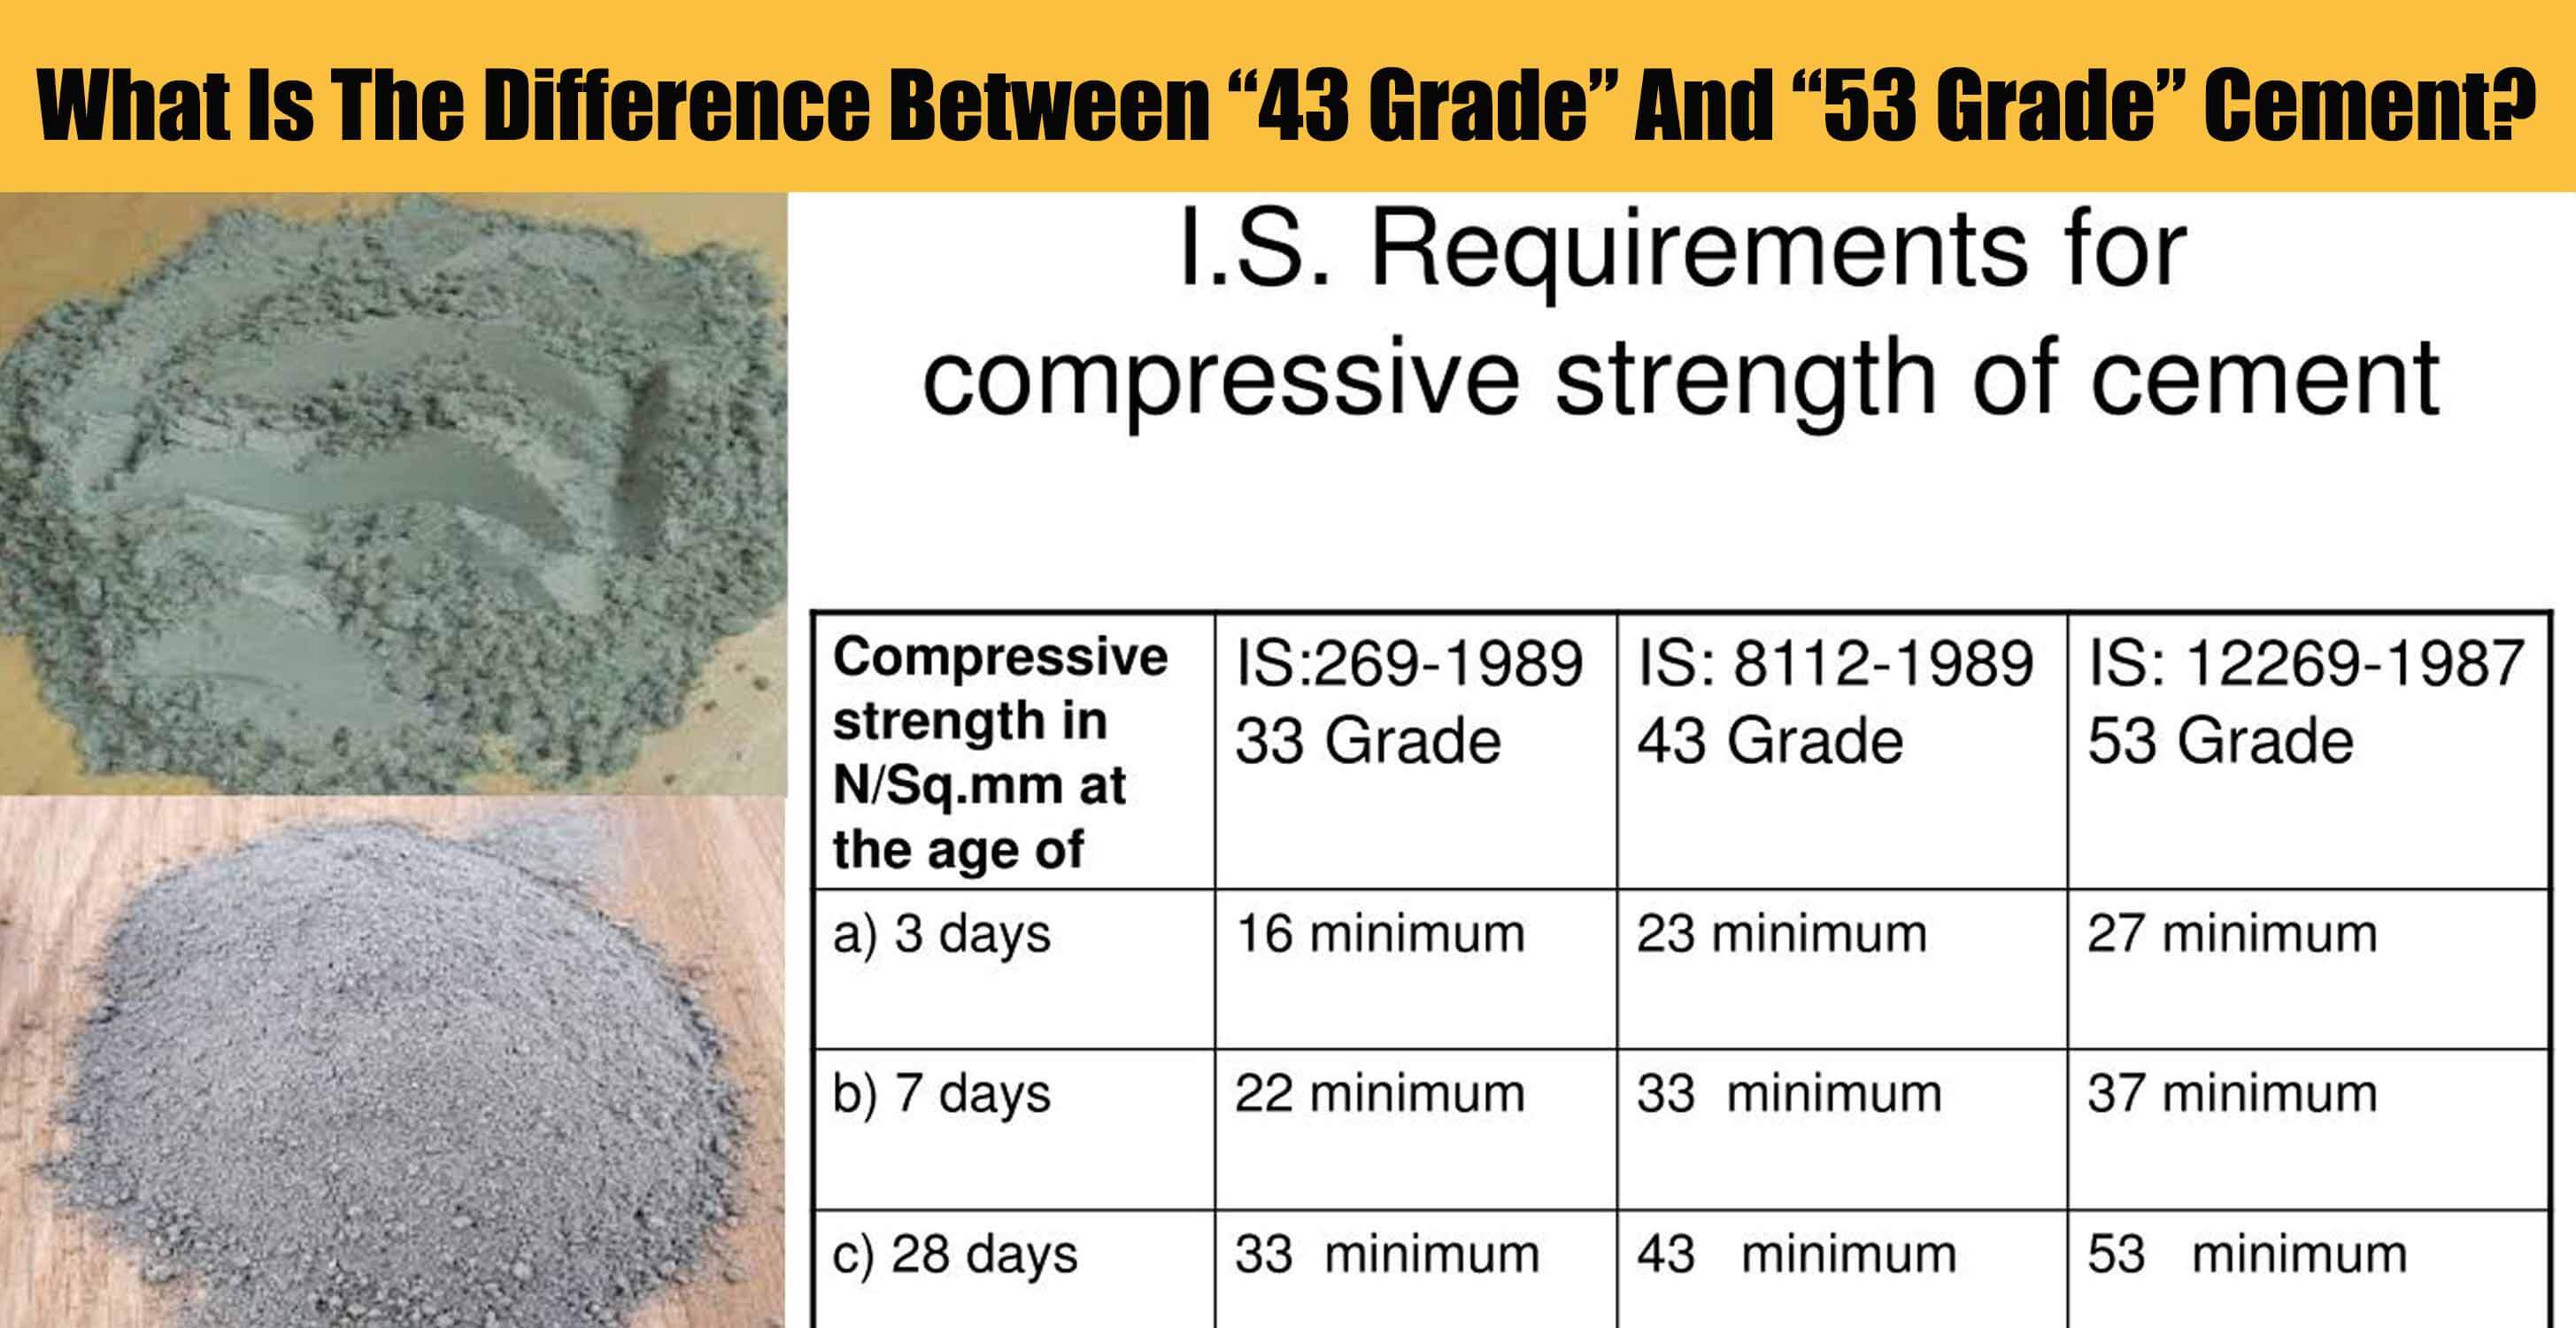 What Is The Difference Between “43 Grade” And “53 Grade” Cement